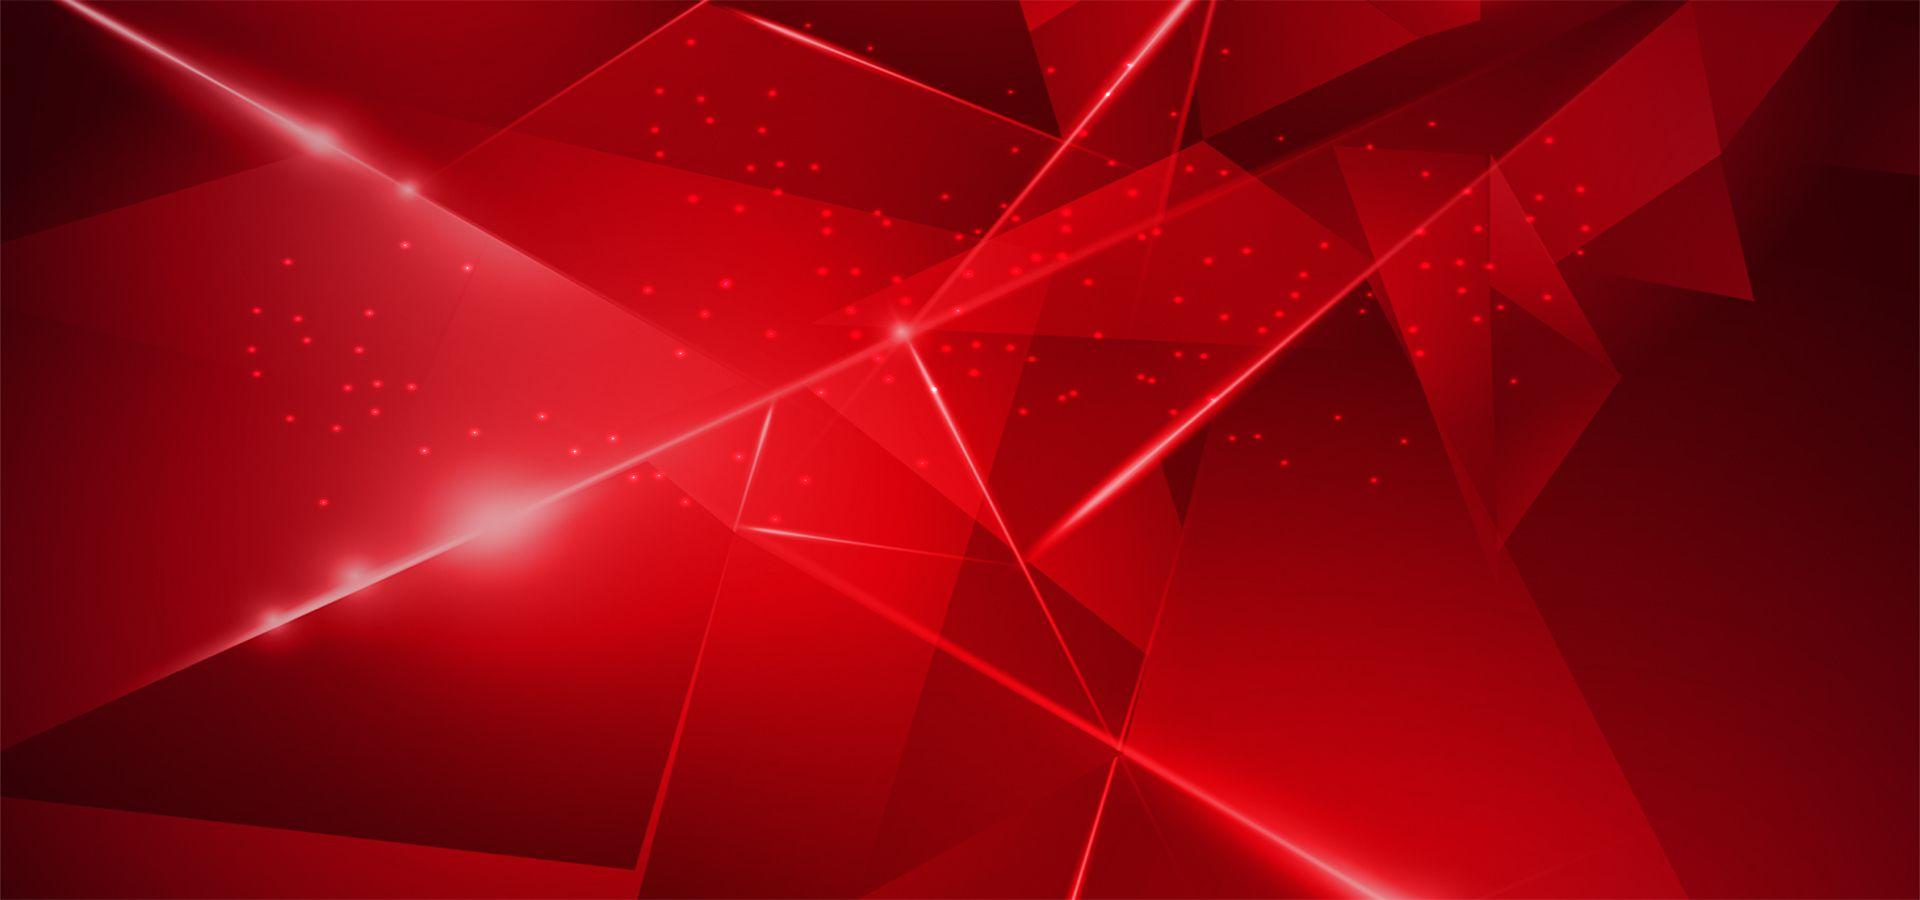 Details 300 red banner background hd - Abzlocal.mx